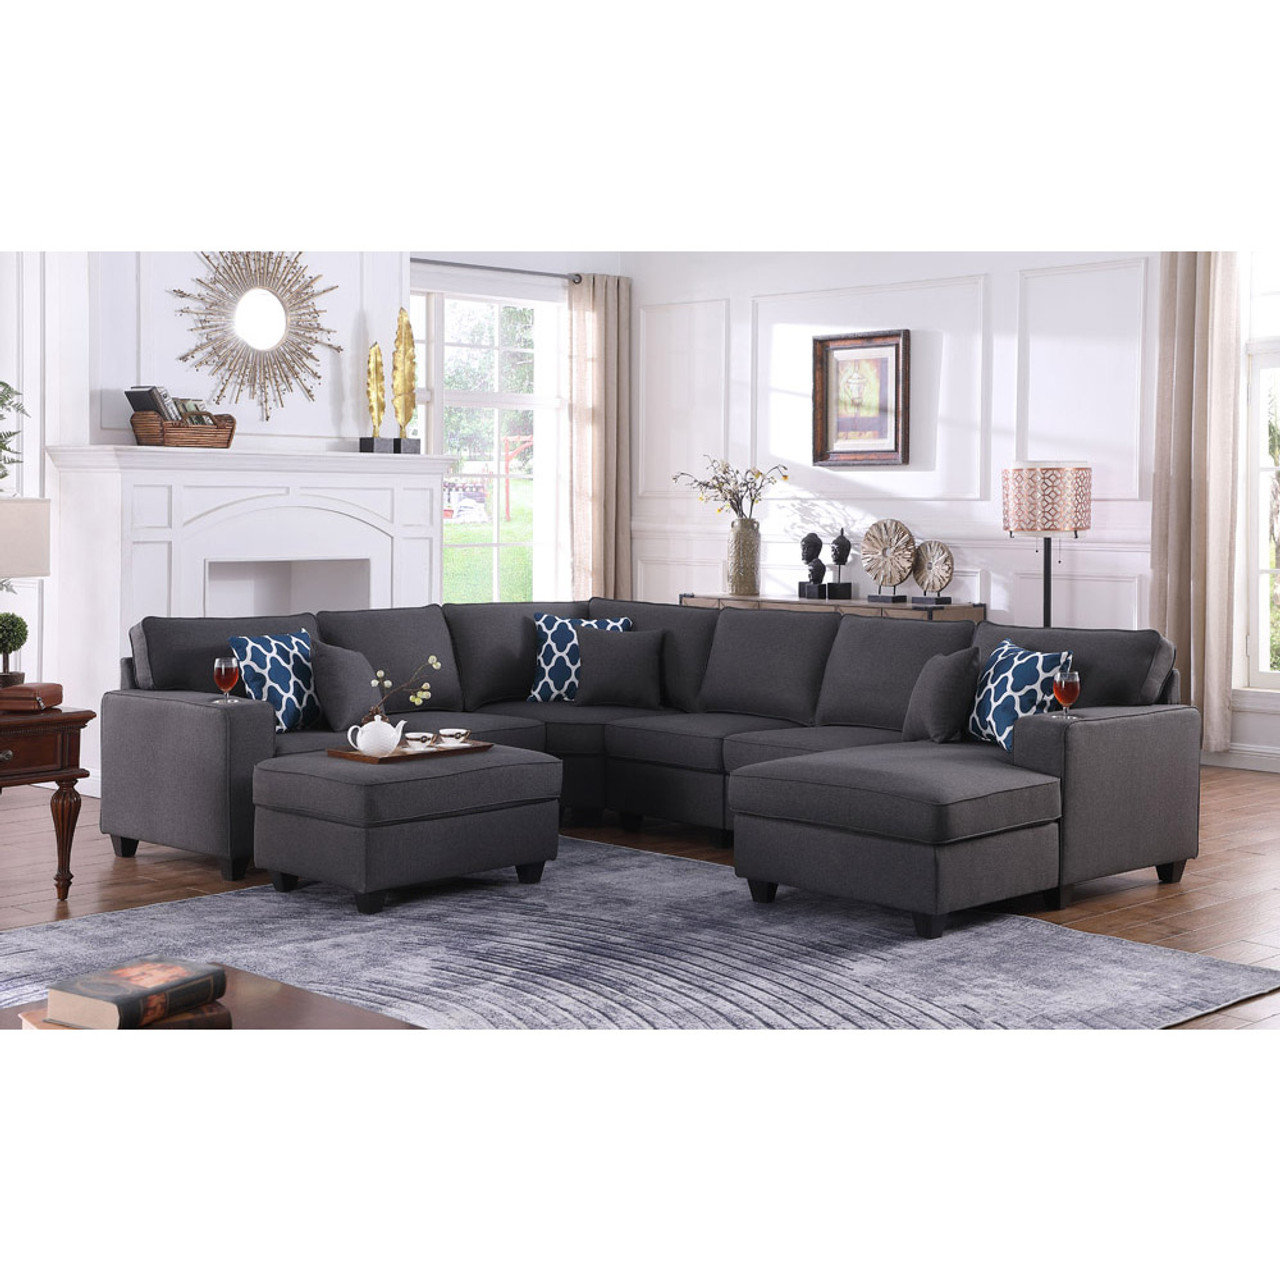 https://cdn11.bigcommerce.com/s-d9g0oj0zhx/images/stencil/1280x1280/products/54684/282052/cooper-dark-gray-linen-7pc-modular-sectional-sofa-chaise-with-ottoman-and-cupholder-89132-1-1__14694.1693992912.jpg?c=2?imbypass=on